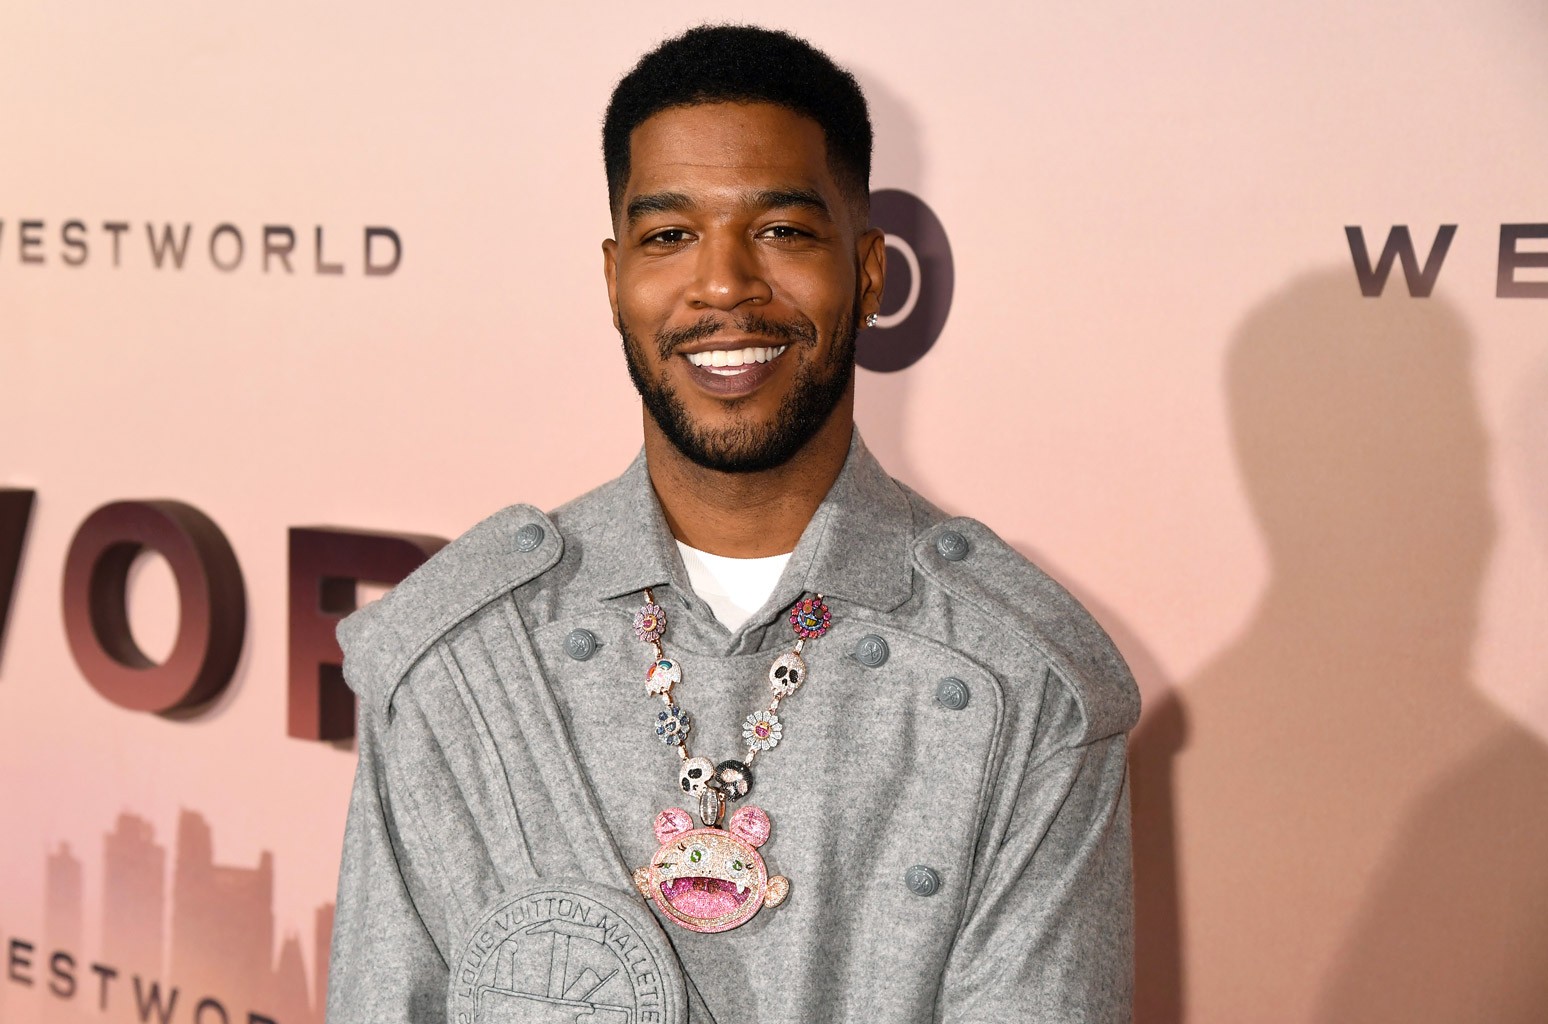 AFTER BEING CLOWNED FOR PAINTING HIS FINGERNAILS, KID CUDI TURNS OFF INSTAGRAM COMMENTS: ‘FUCK WAY OFF’